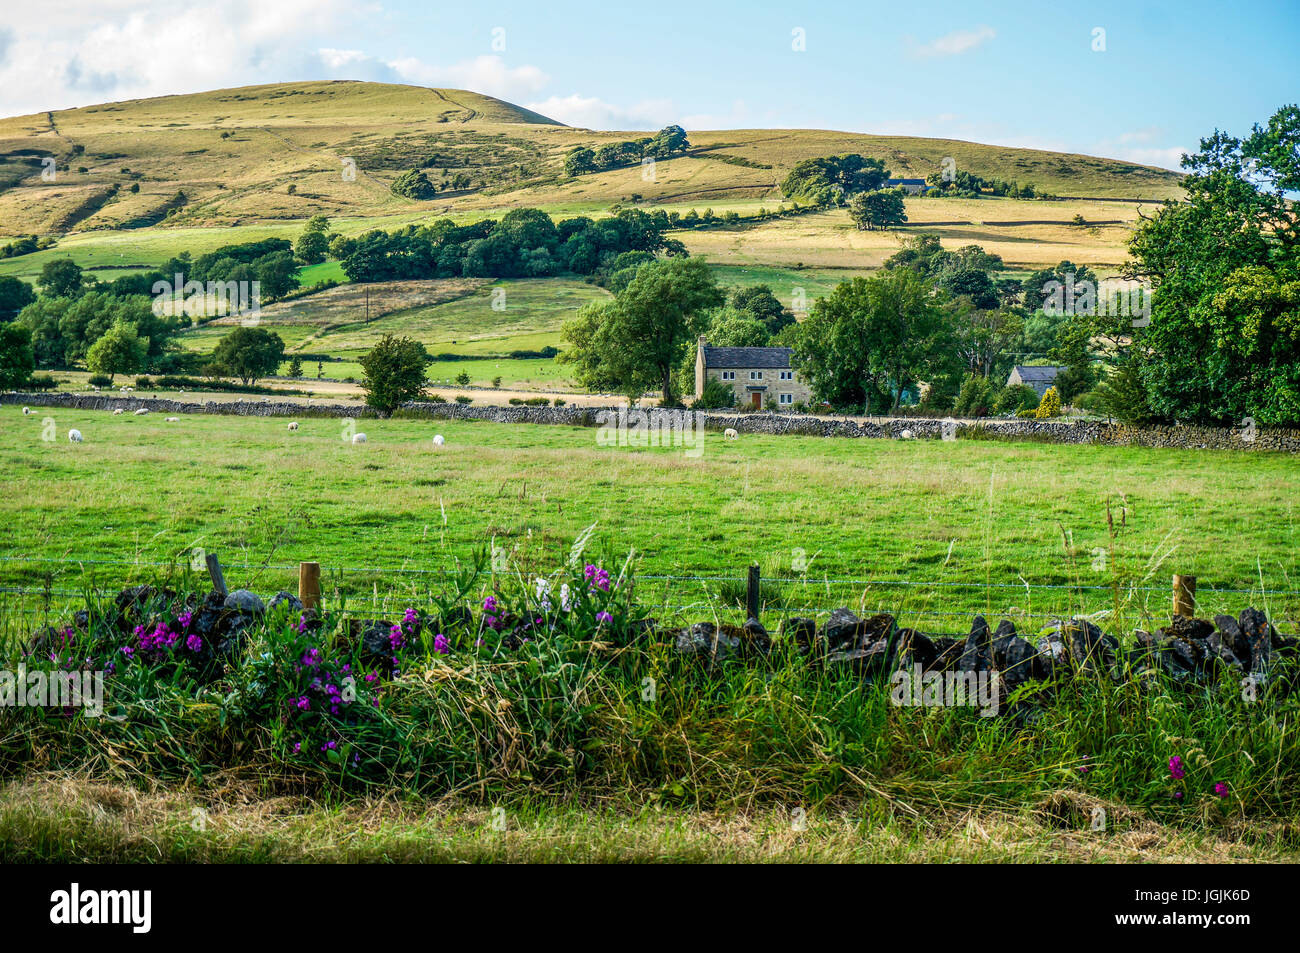 Sheep grazing in a field with a hillside backdrop, between Castleton and Hope in the Peak District, Derbyshire, England. Stock Photo